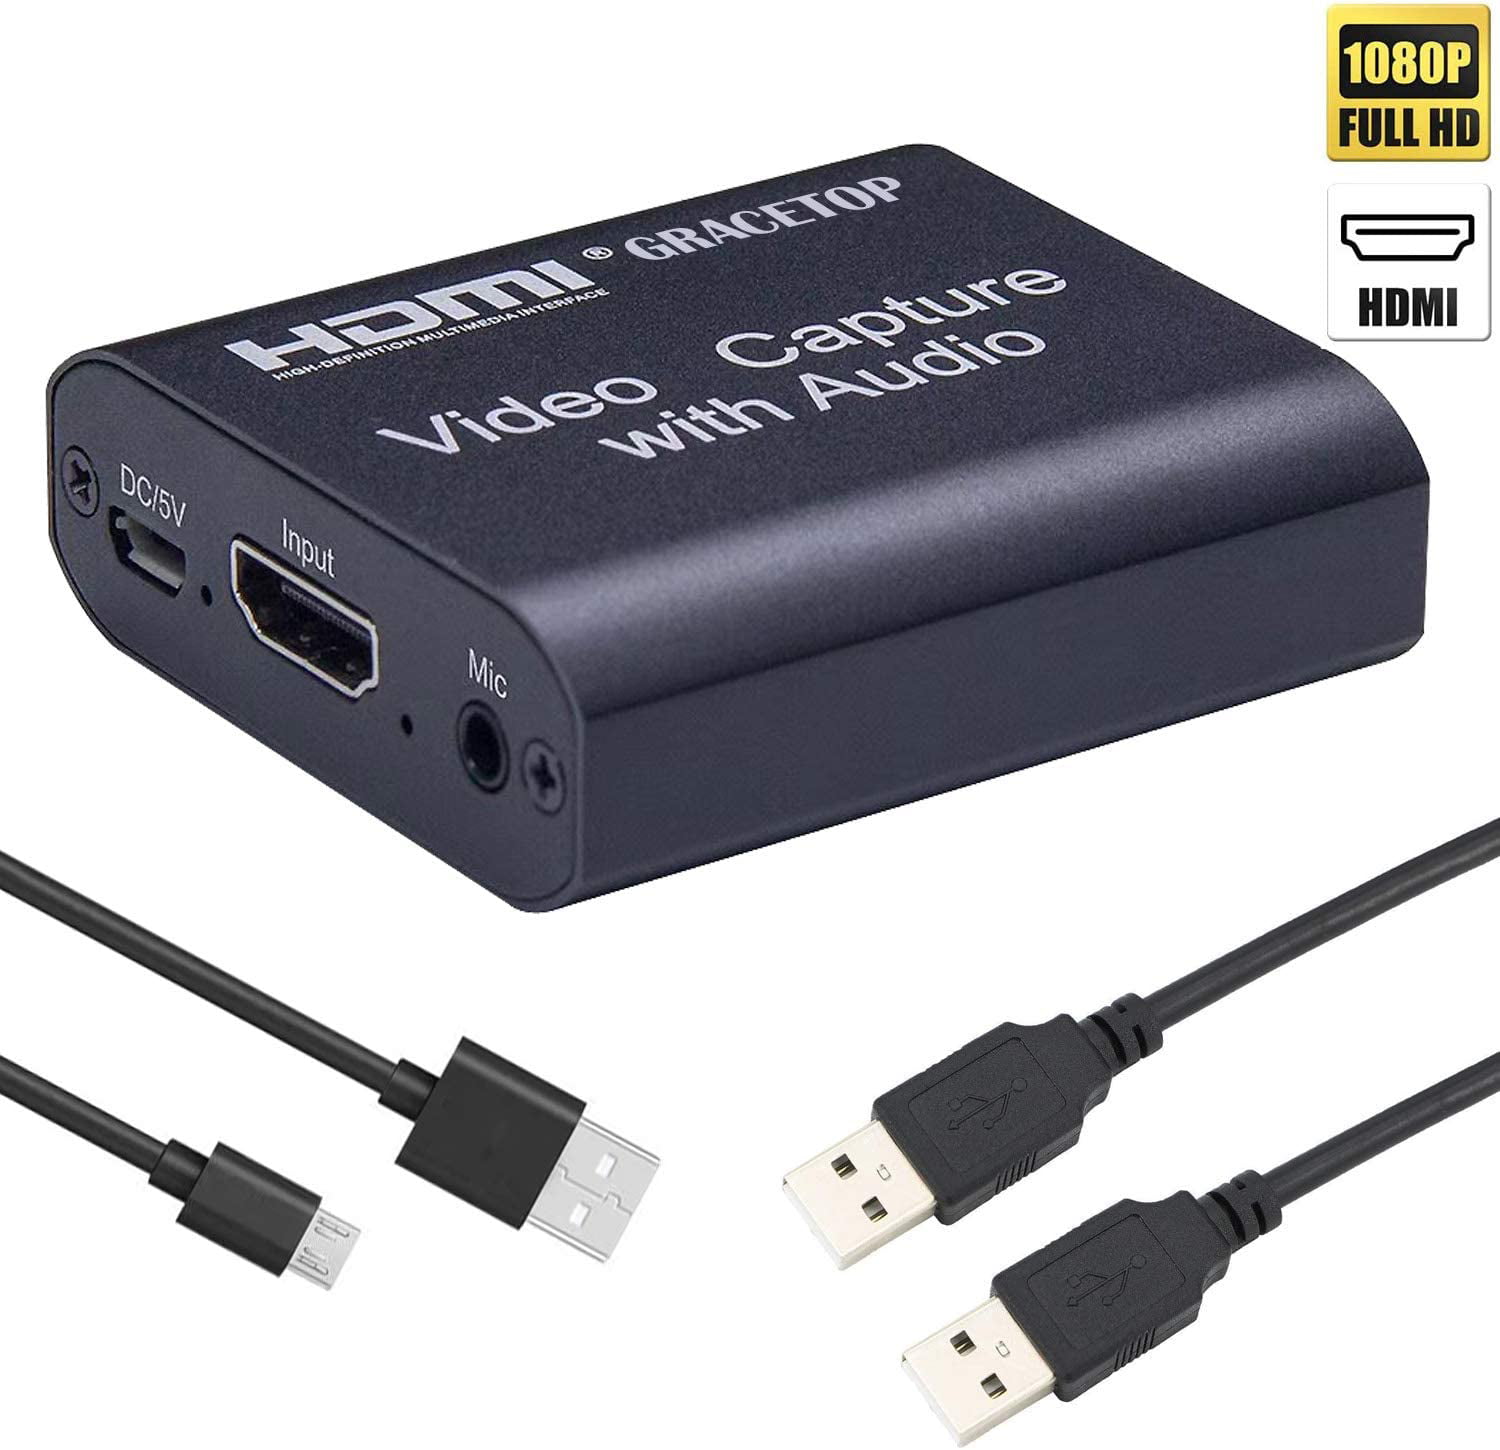 hdmi capture card with screen capture